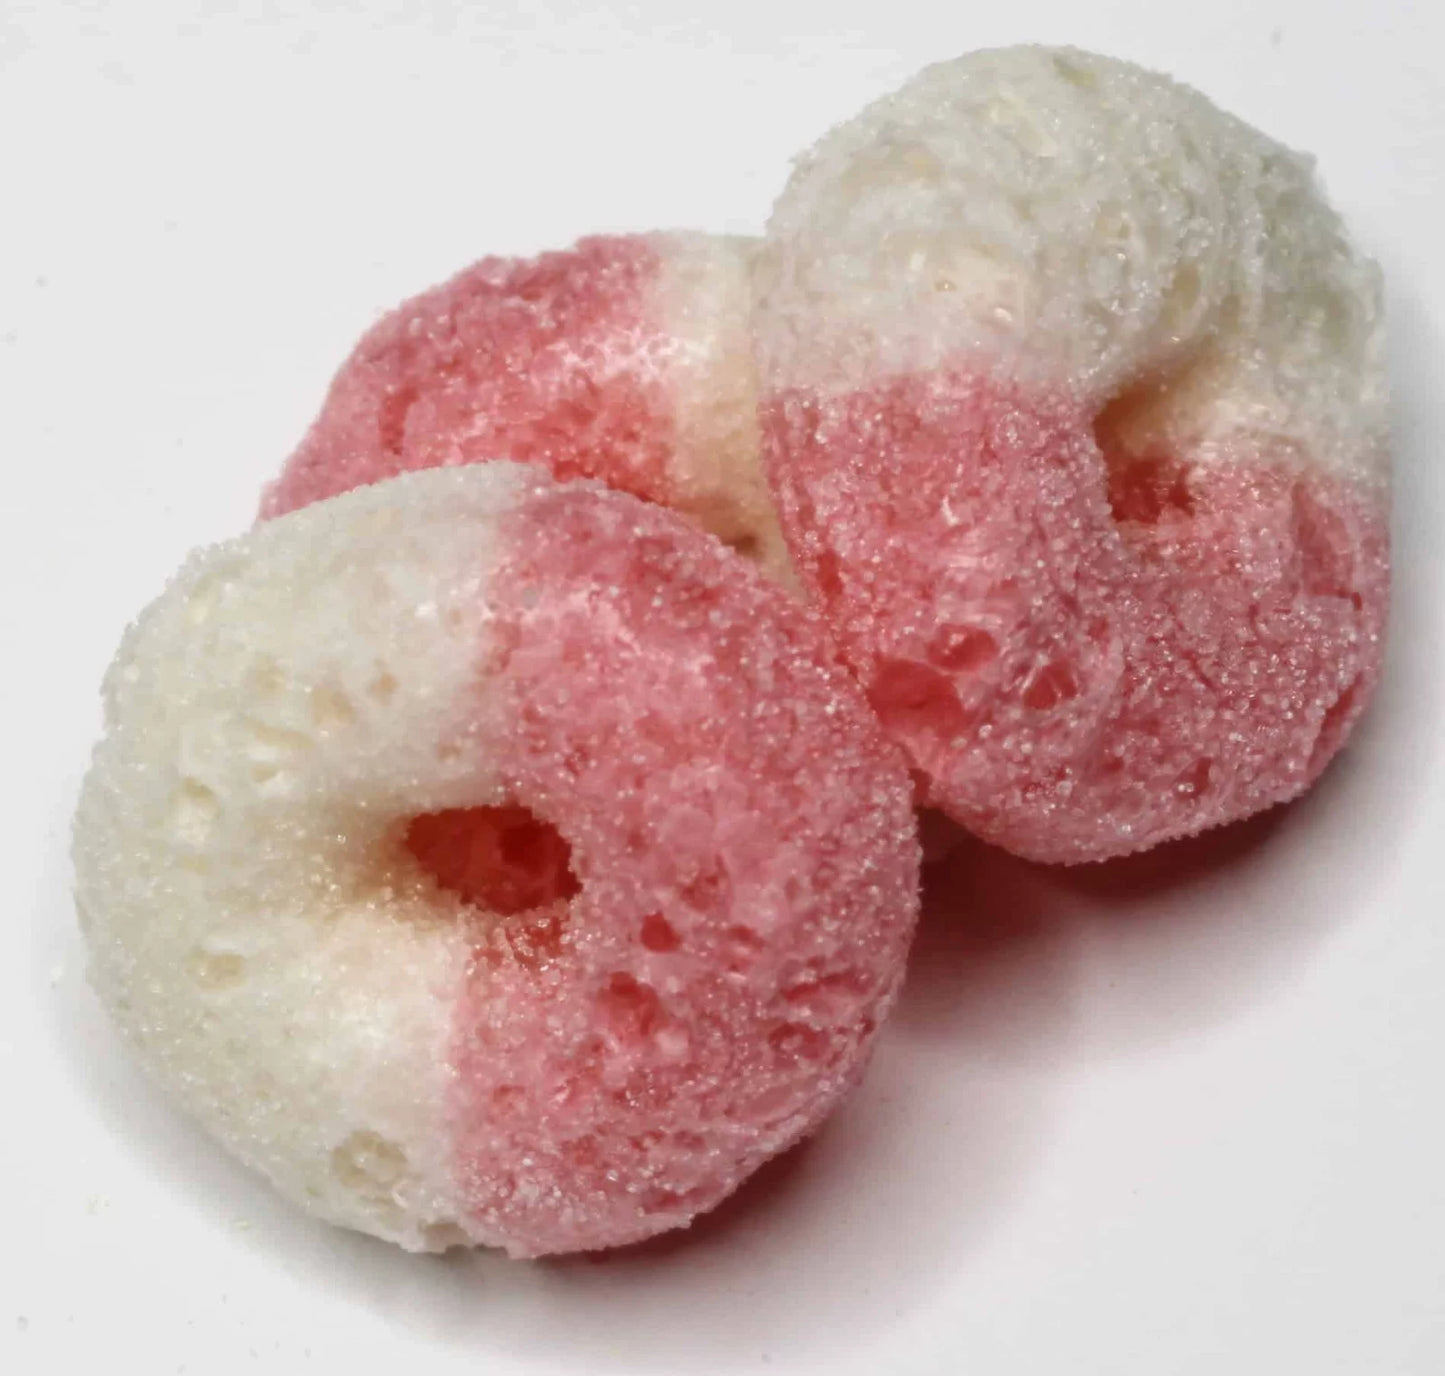 Apple & Watermelon Rings Mix Freeze Dried